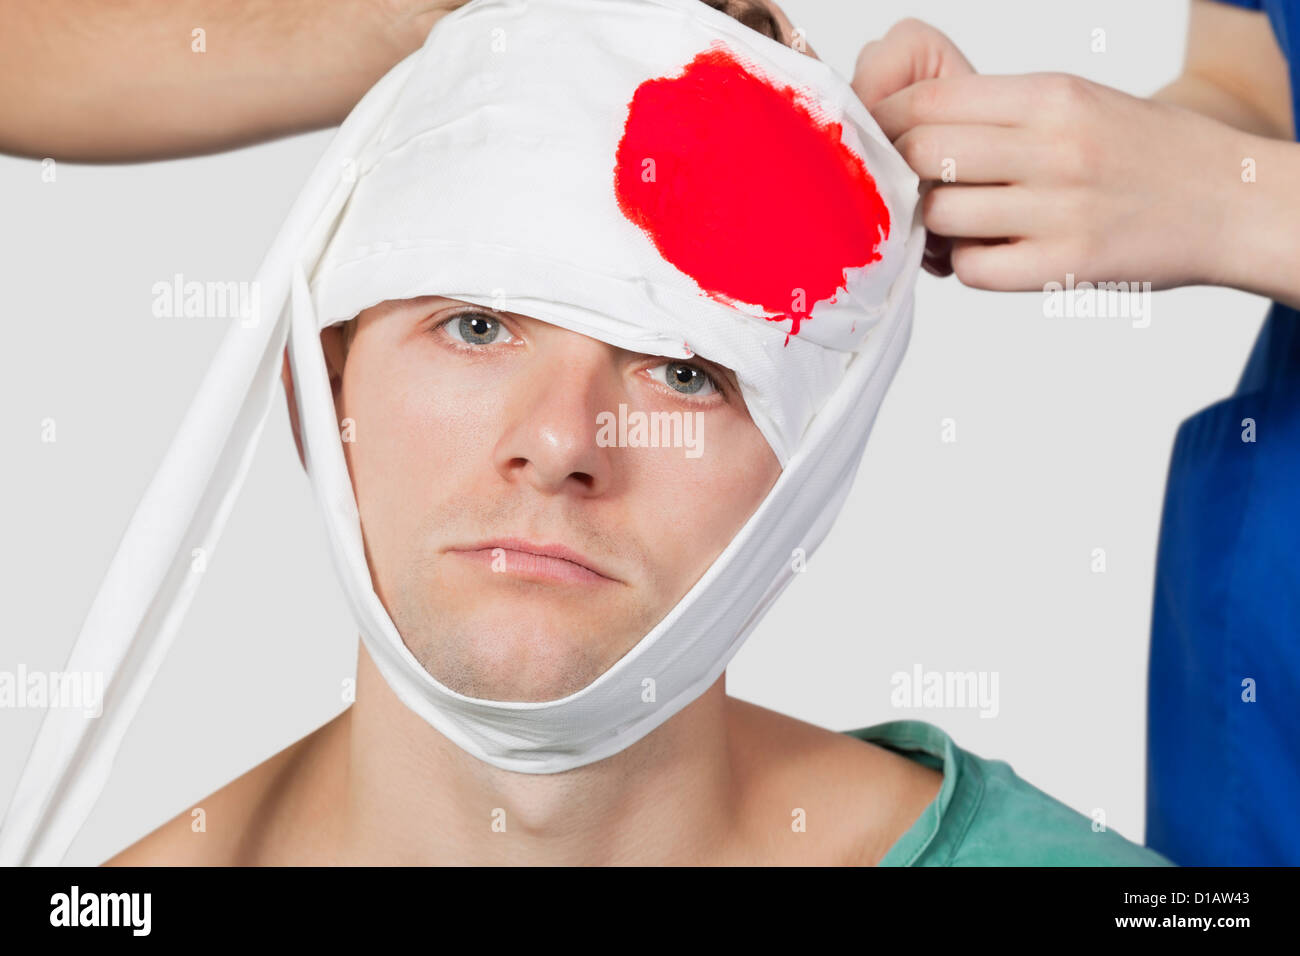 Portrait injured young man being treated by doctors Stock Photo